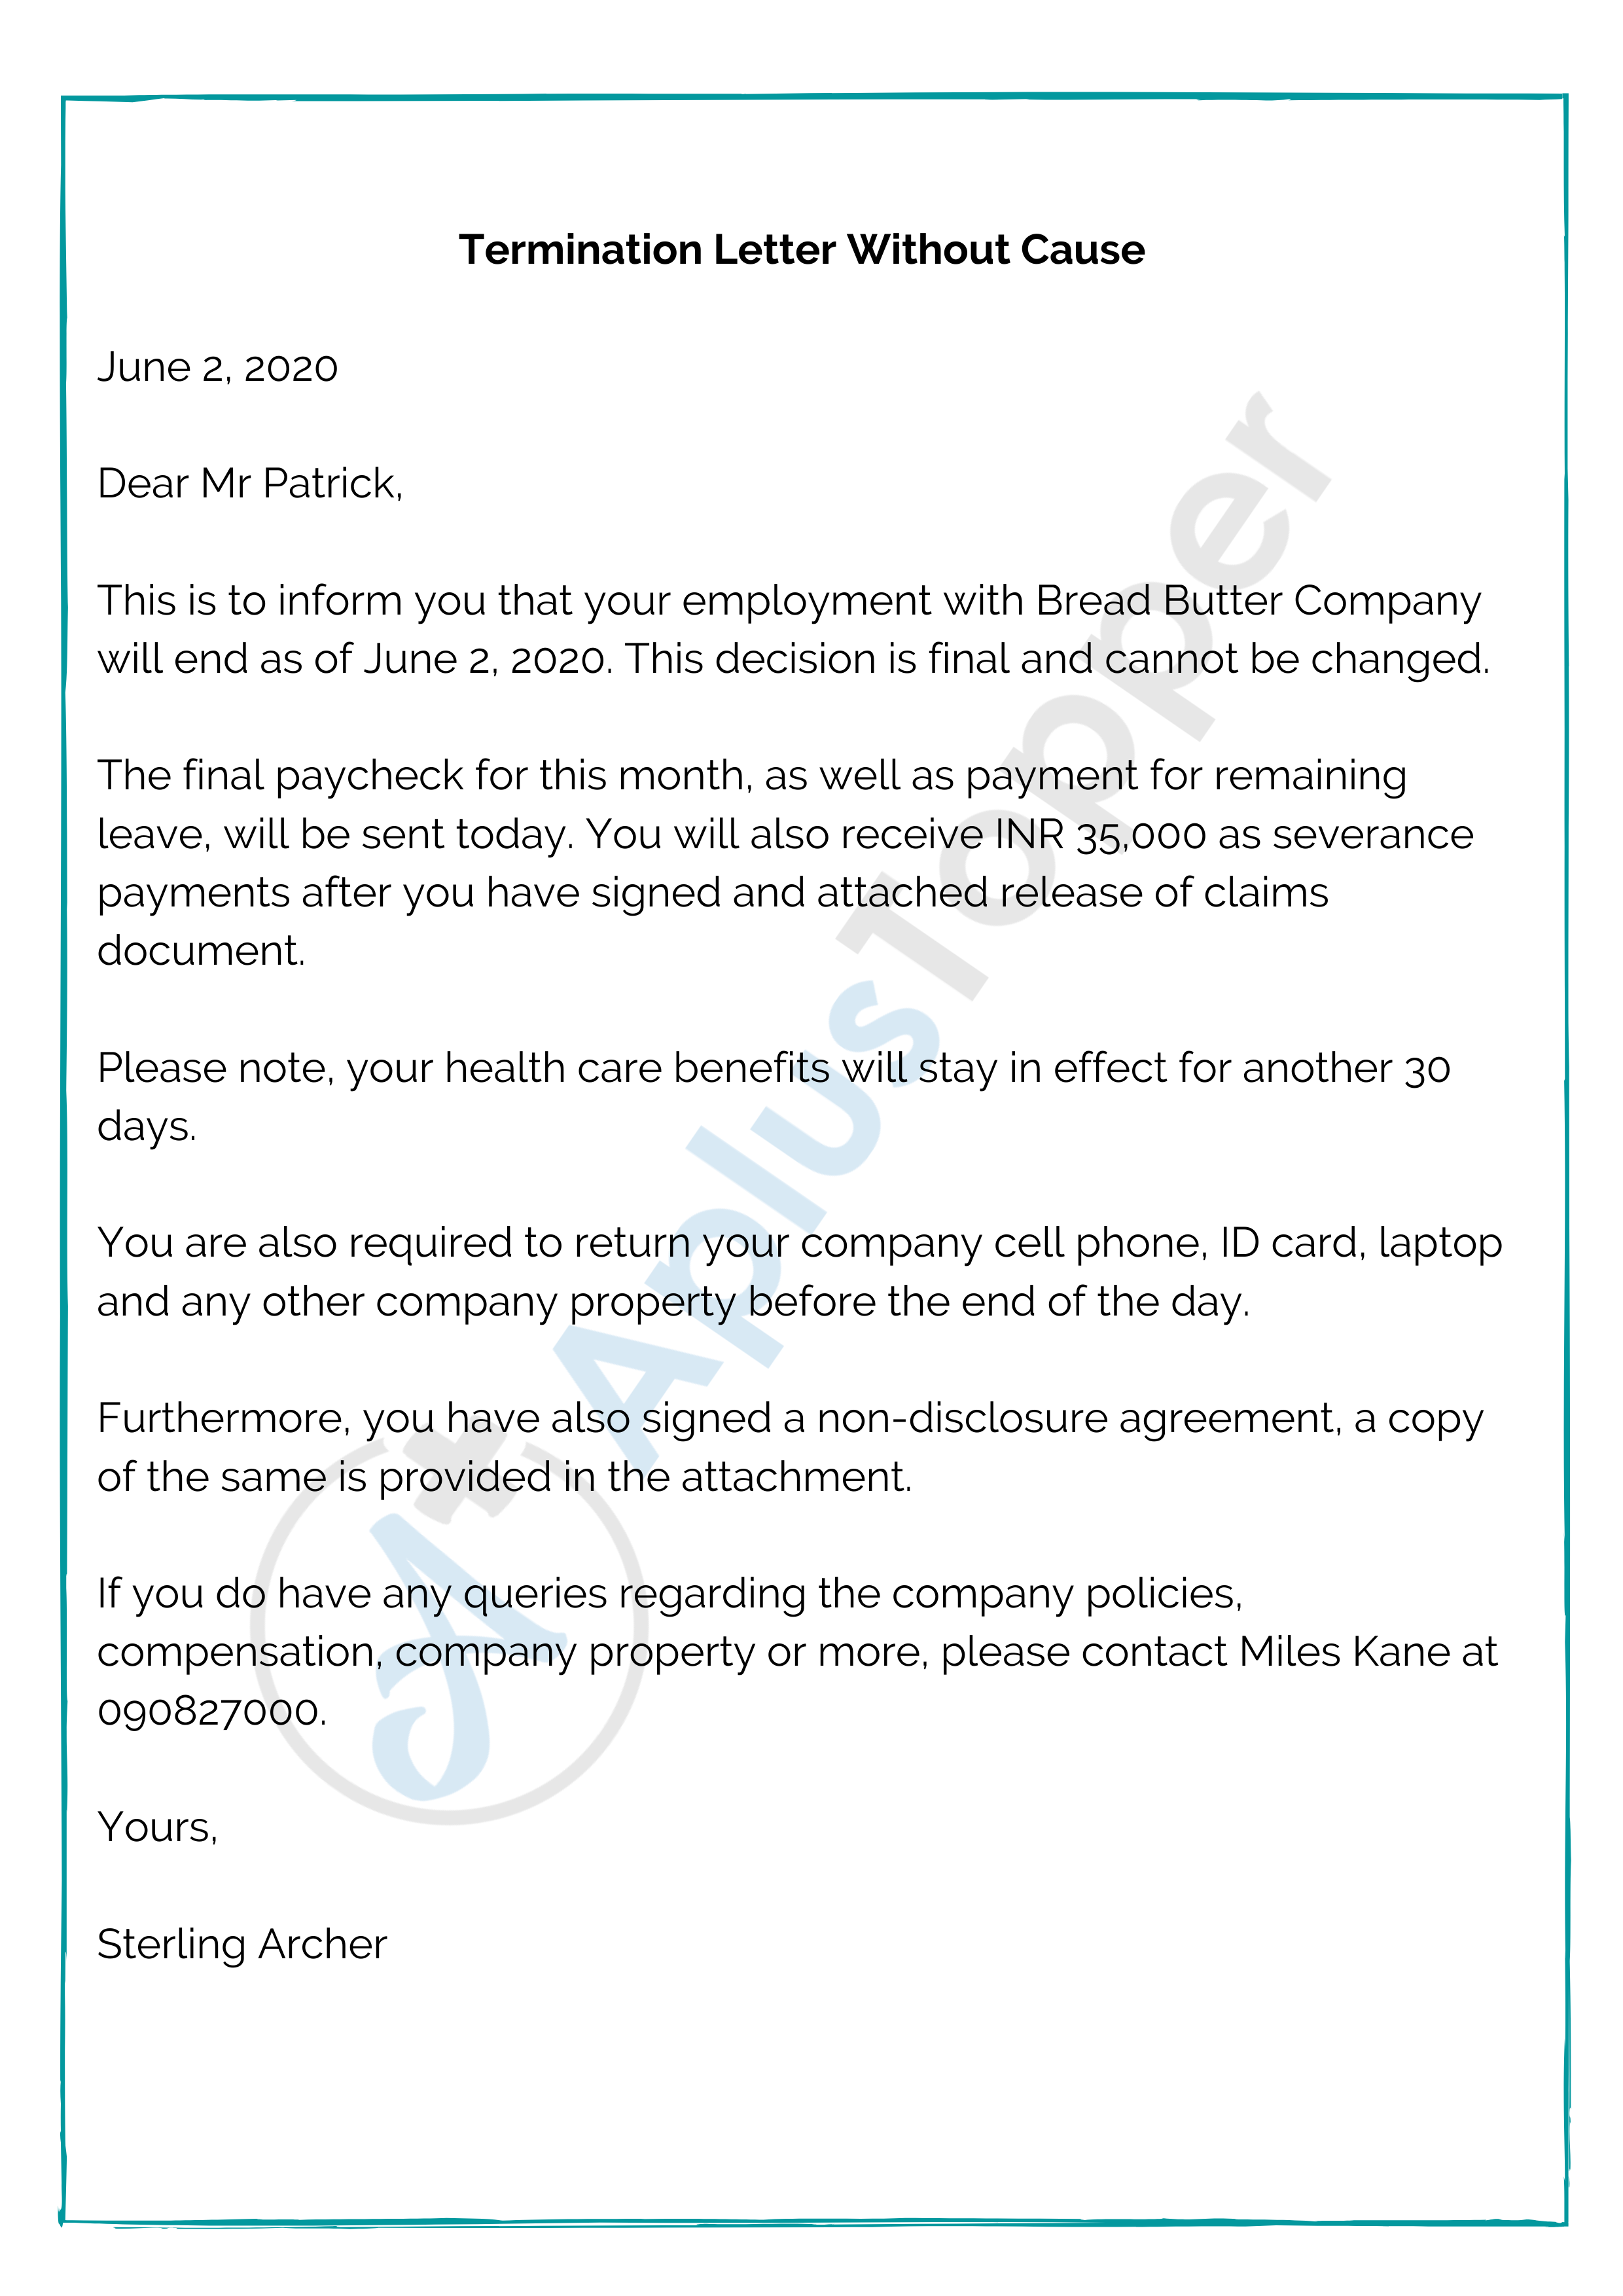 Termination Letter Samples, Examples, How To Write Termination Letter